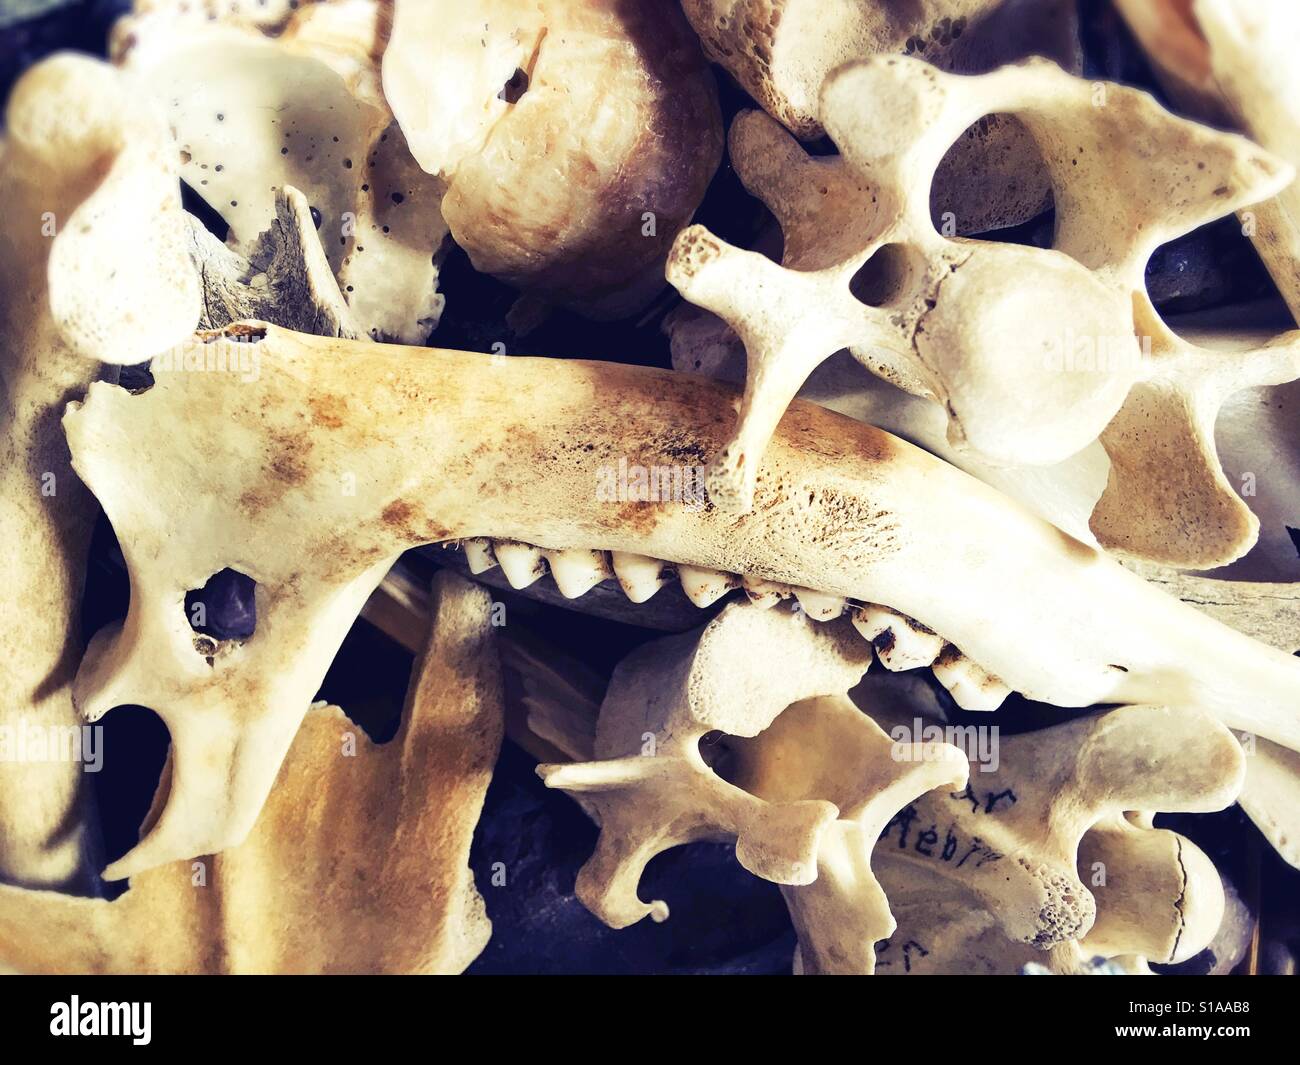 A pile of animal bones used for educational purposes Stock Photo - Alamy